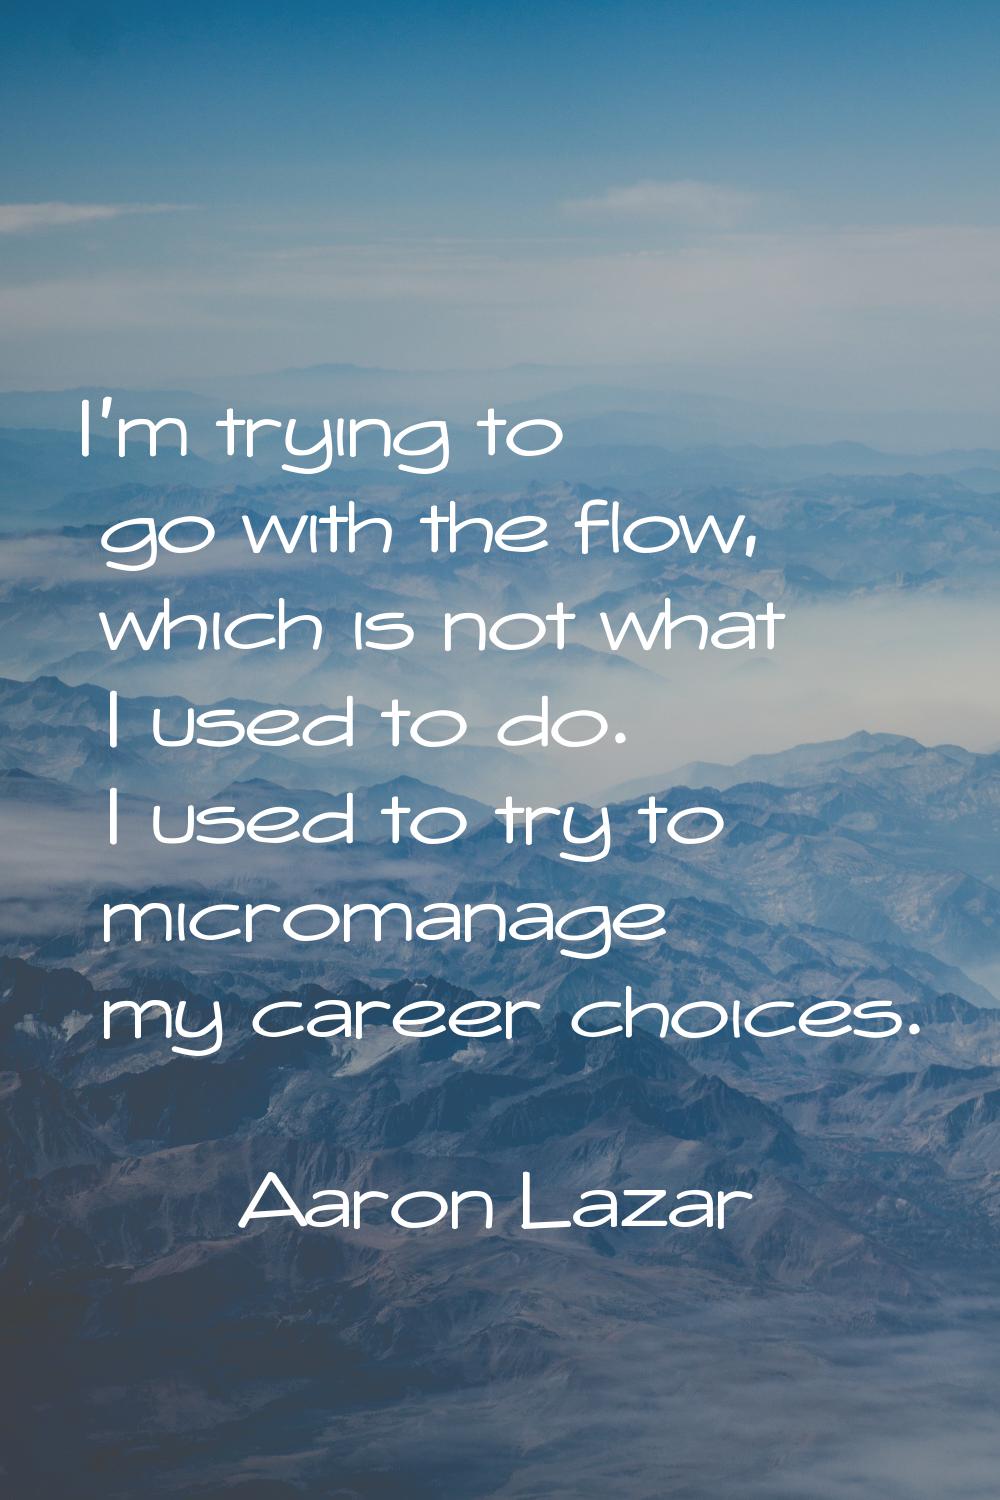 I'm trying to go with the flow, which is not what I used to do. I used to try to micromanage my car